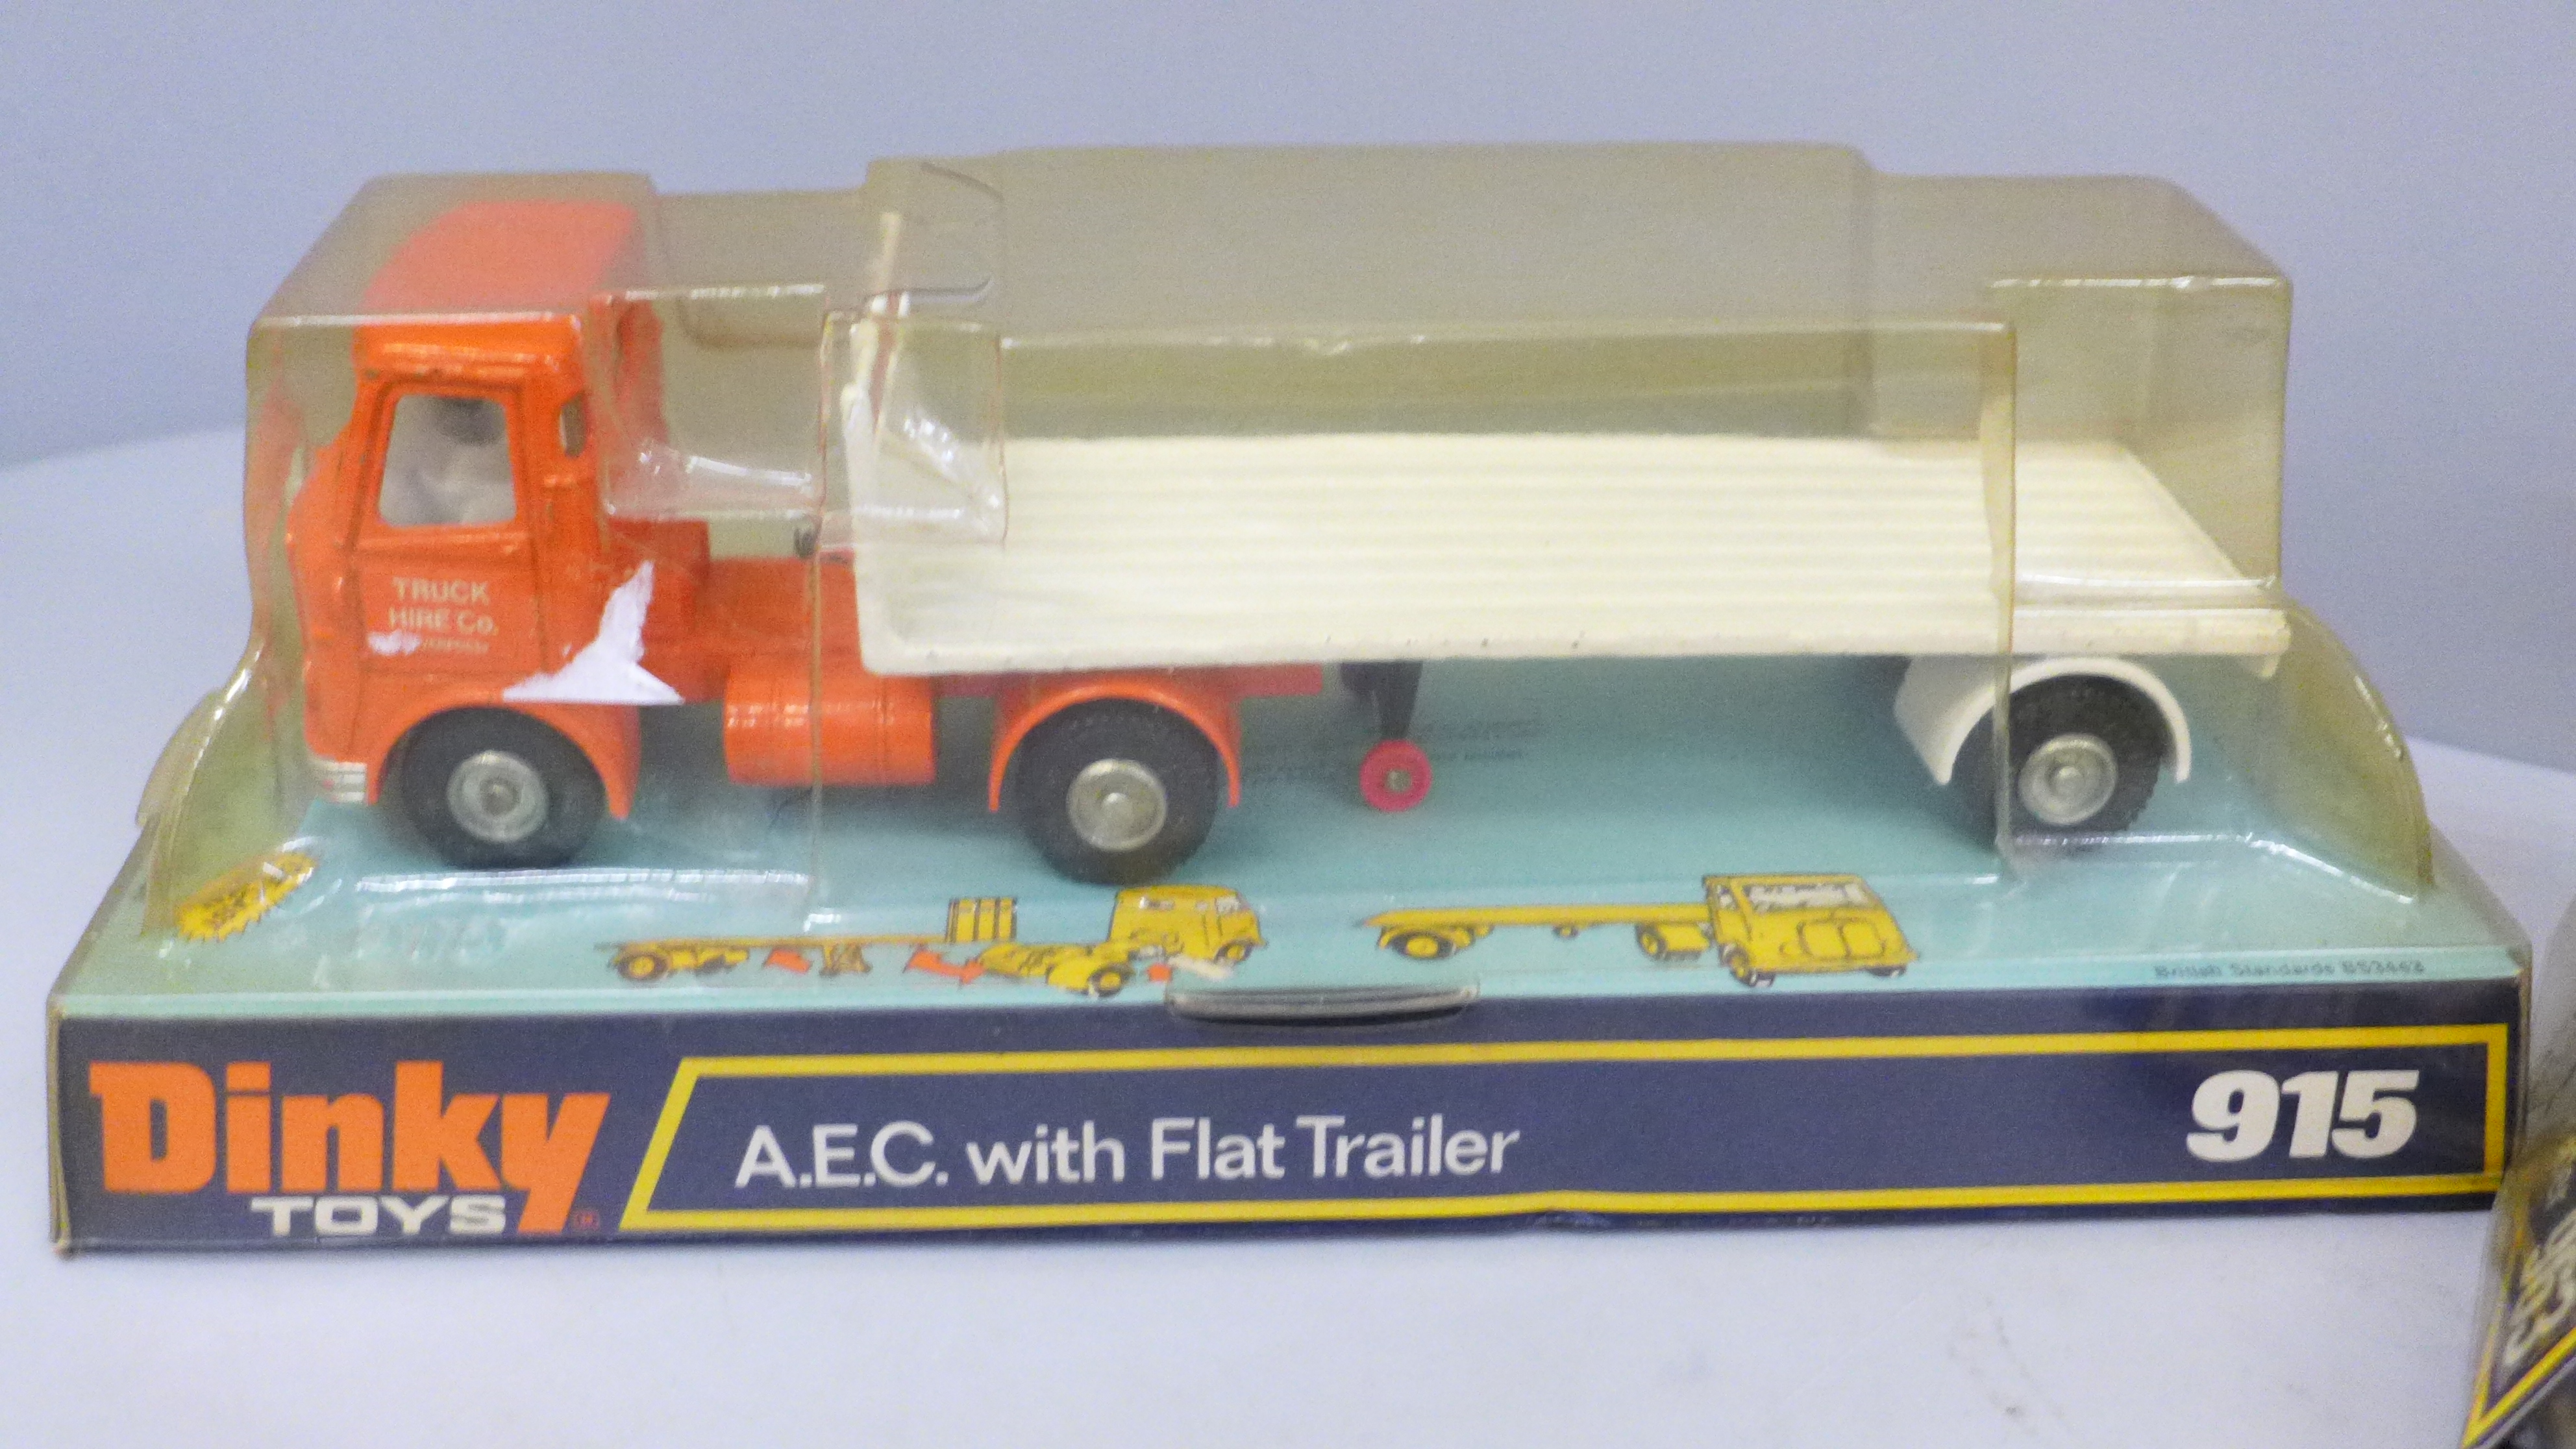 Dinky Toys Road Grader 963 and Dinky Toys AEC with flat trailer 915, both packaged, boxes a/f - Image 4 of 4